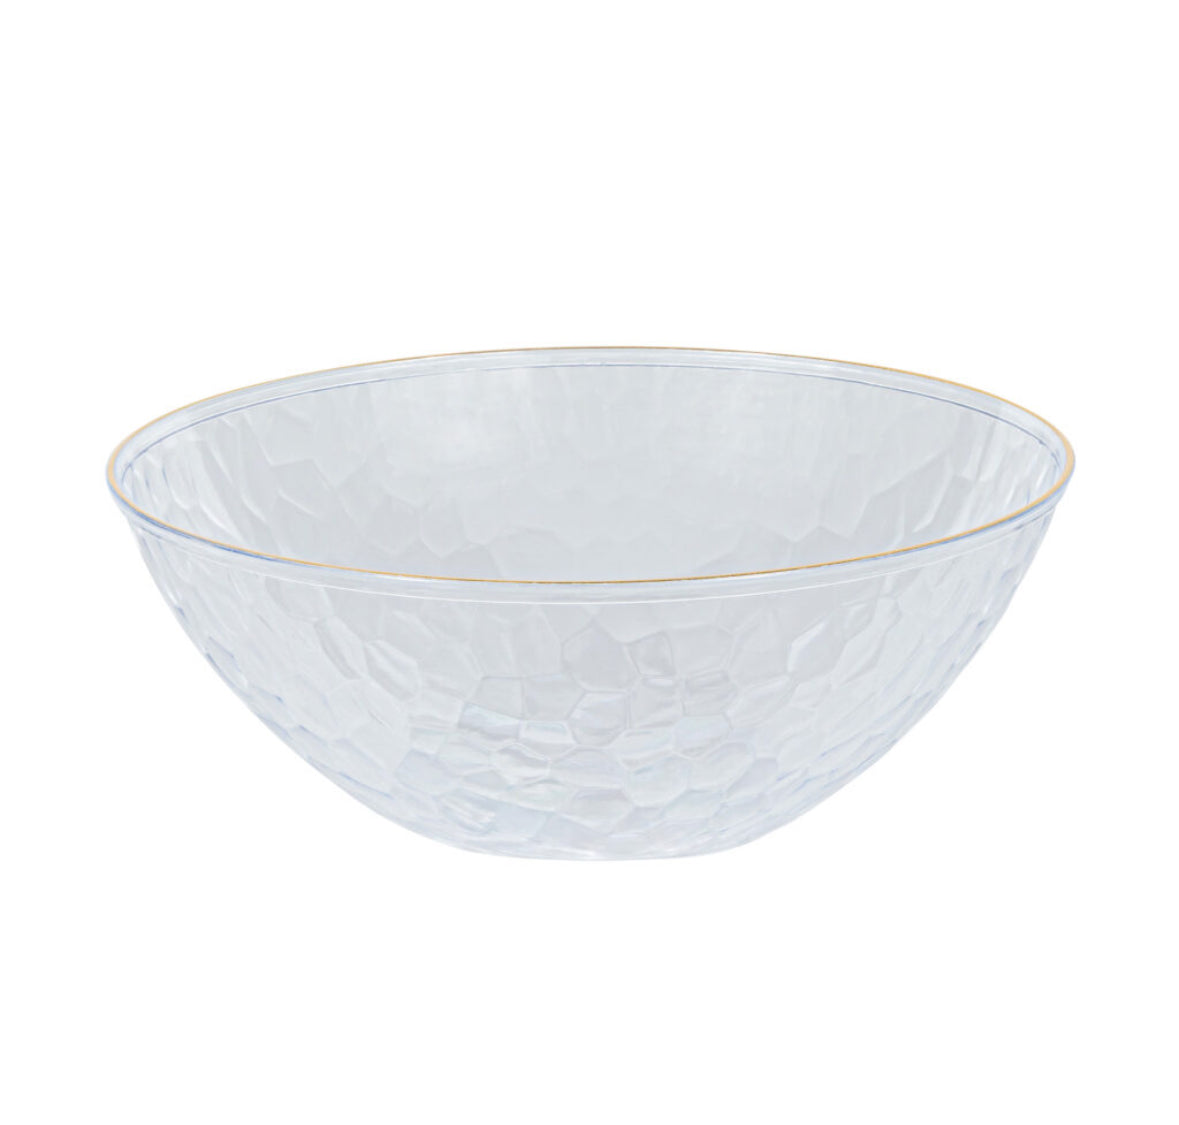 Hammered Bowls 12oz Clear/ Gold Rim (10 Count)